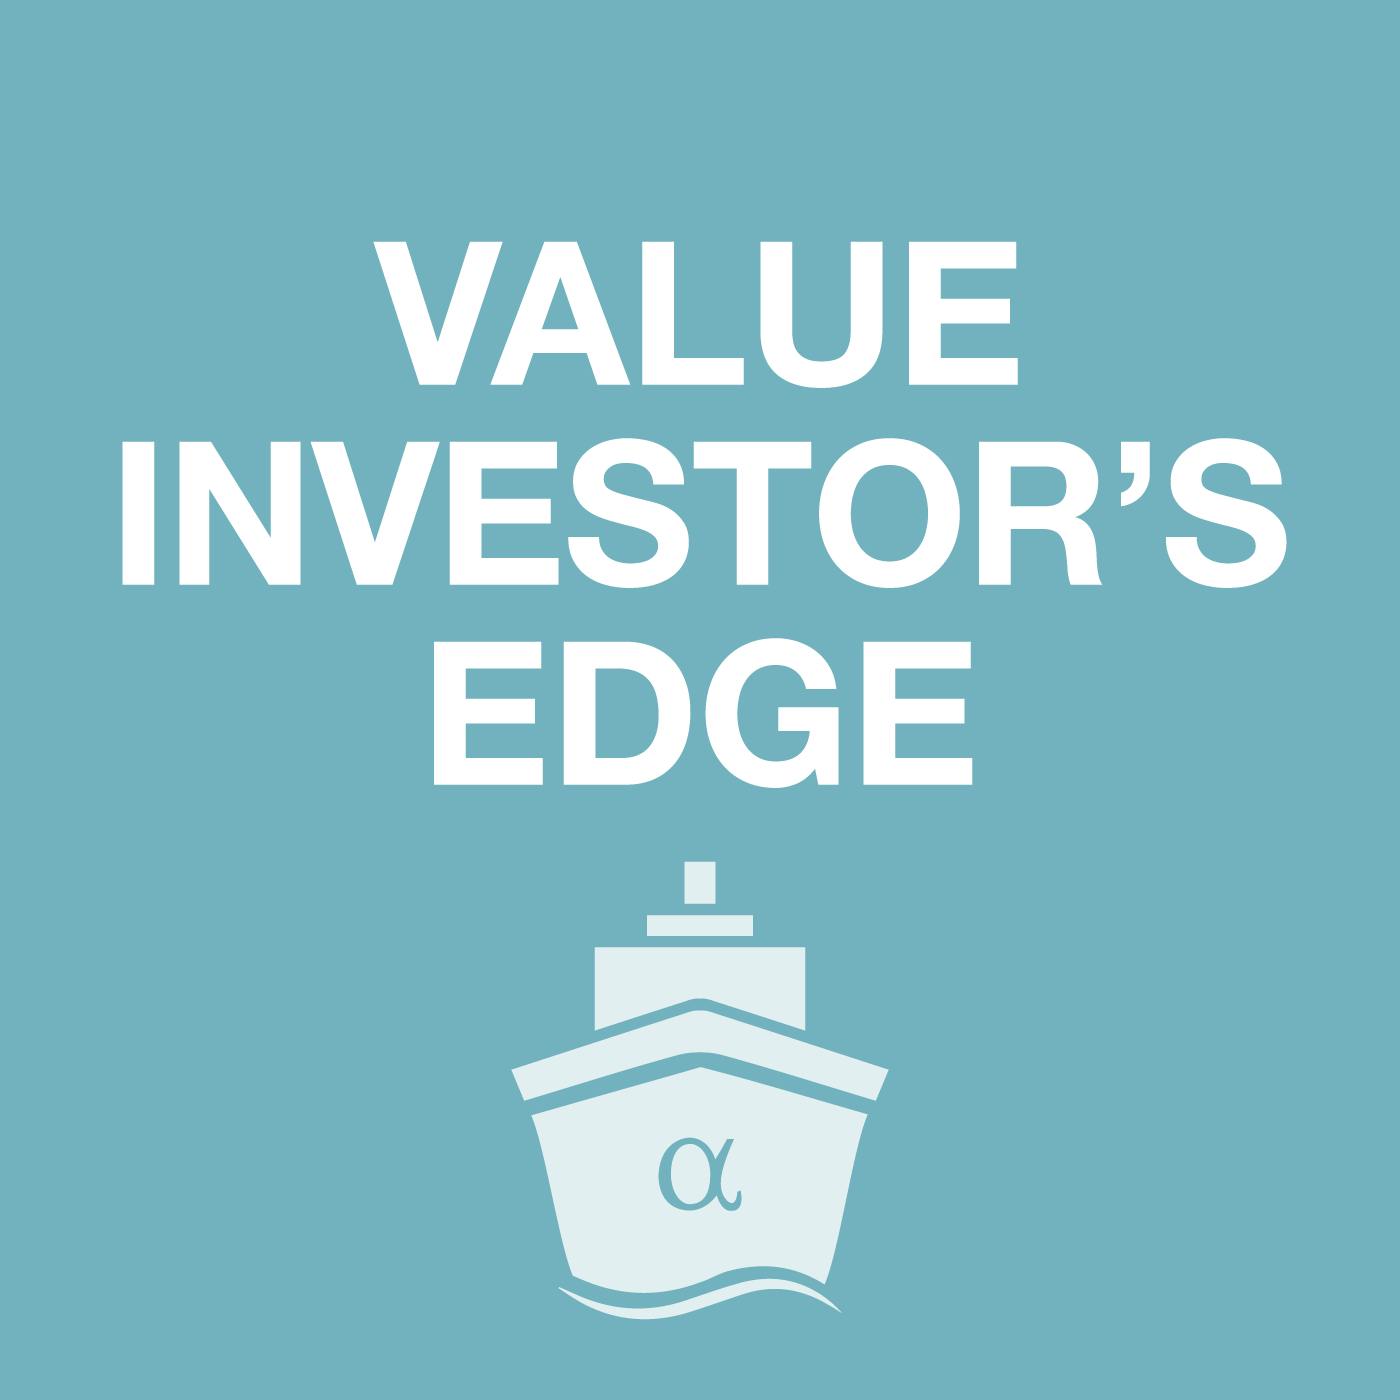 Value Investor's Edge Live #19: Post-Earnings Discussion With Ardmore Shipping CEO Anthony Gurnee And CFO Paul Tivnan